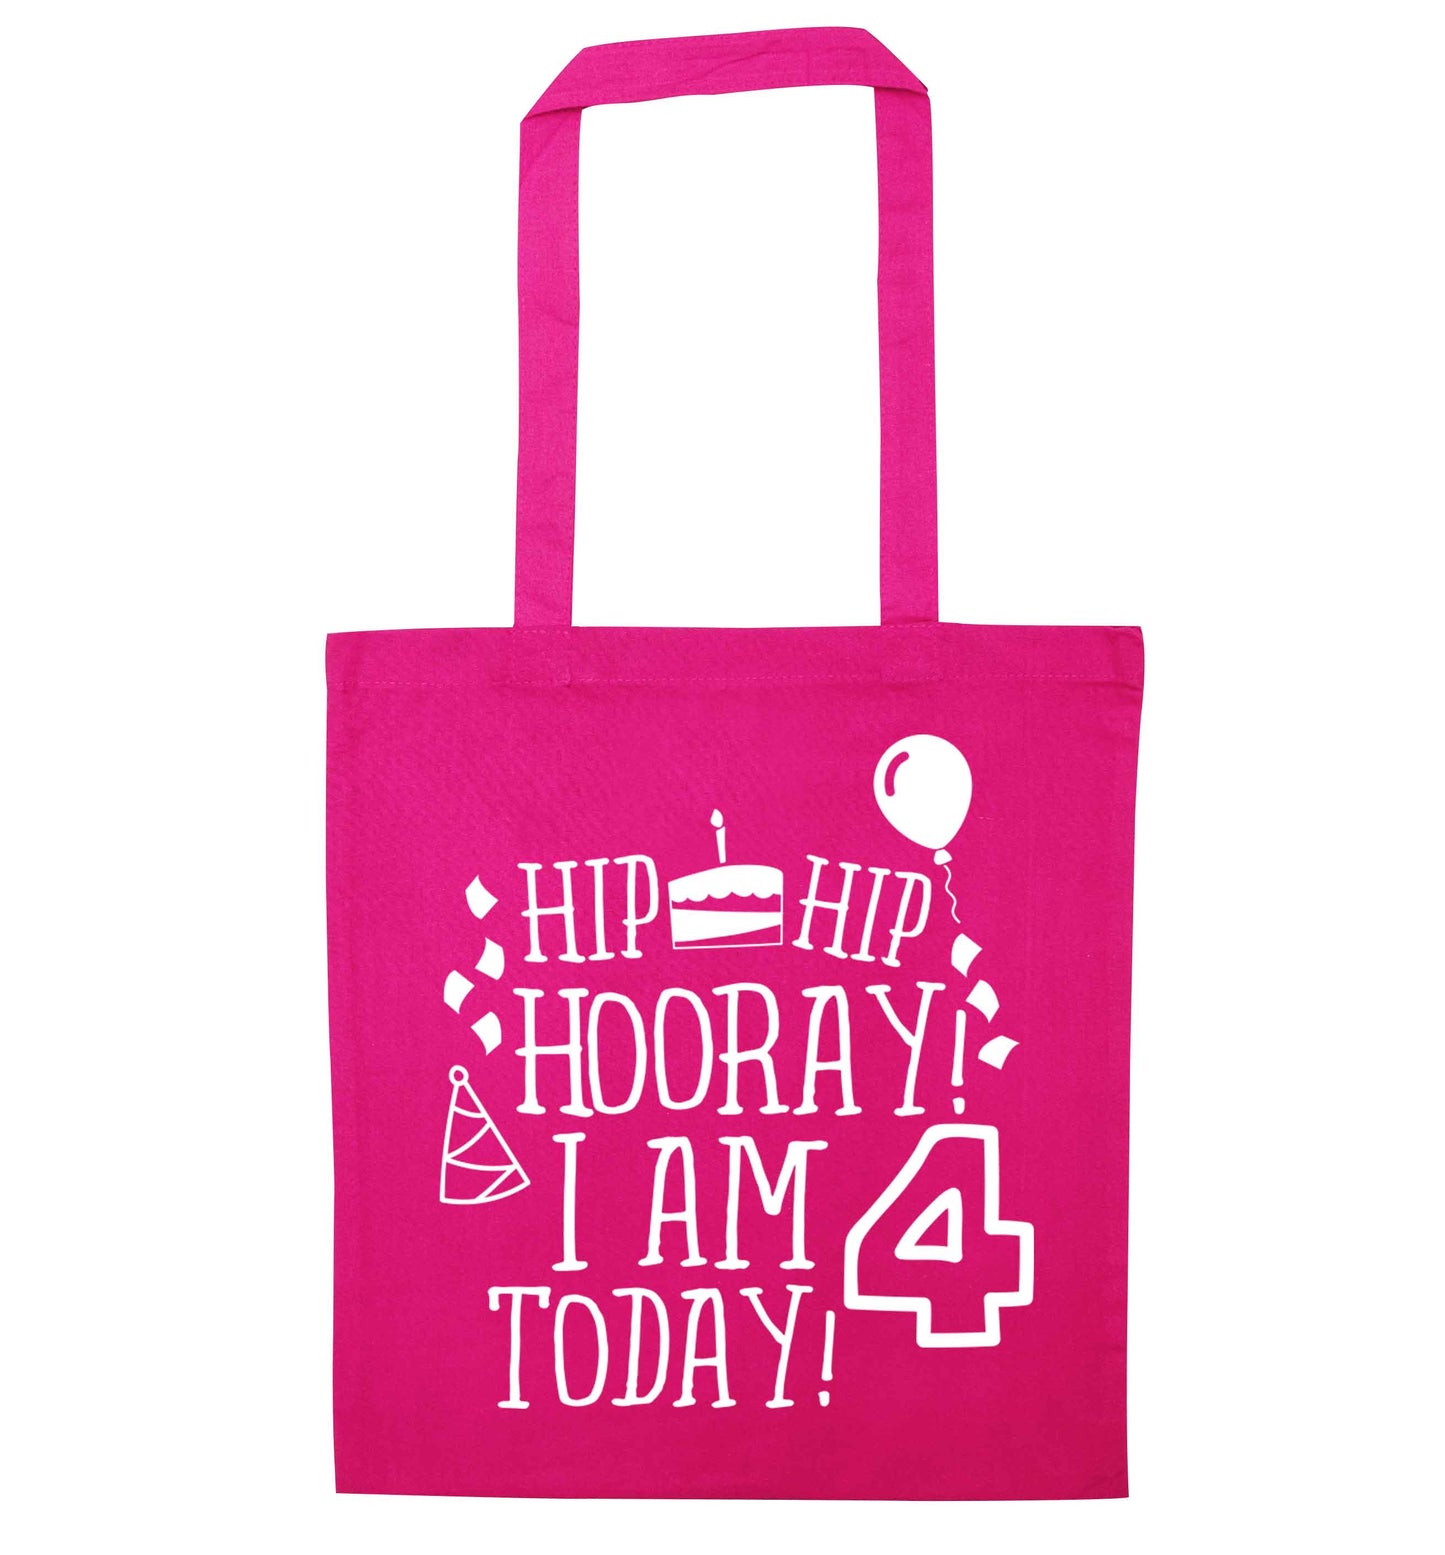 Hip hip hooray I am four today! pink tote bag